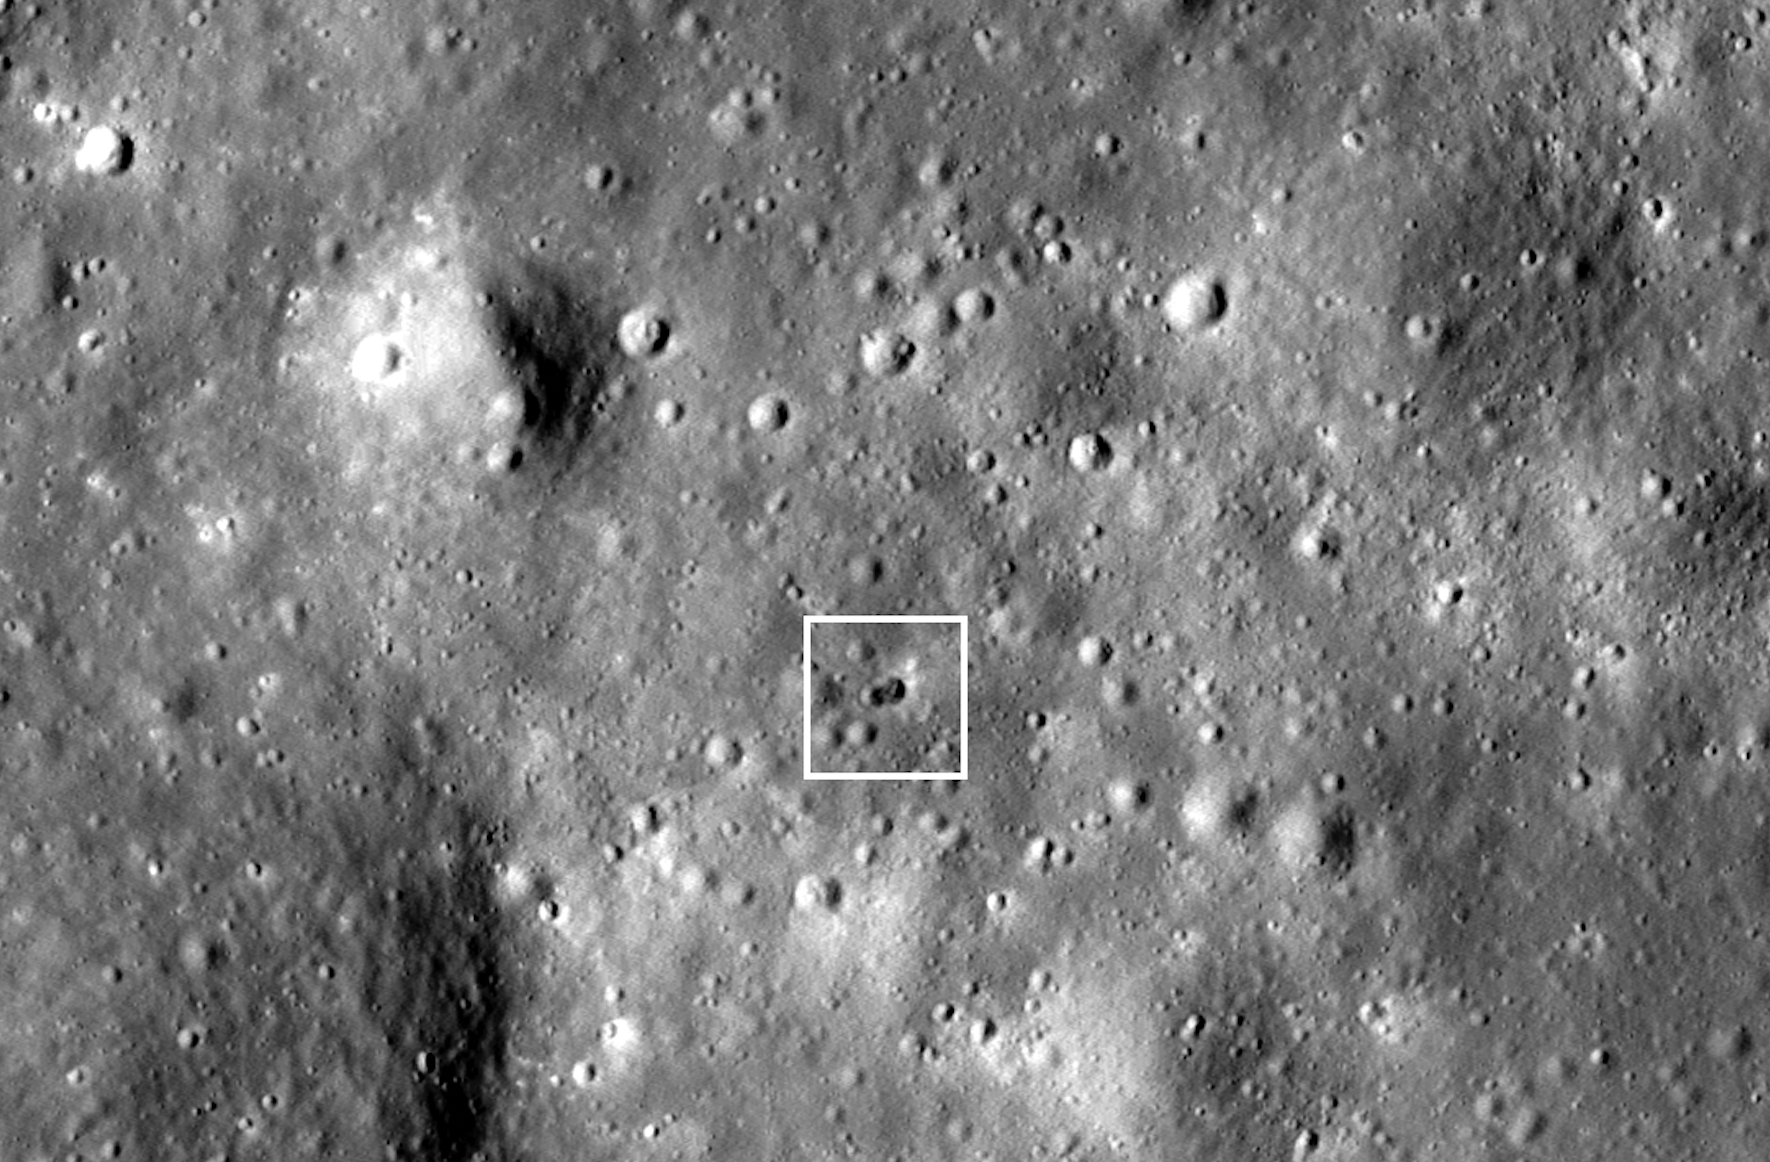 Full resolution image centered on the new rocket body impact double crater